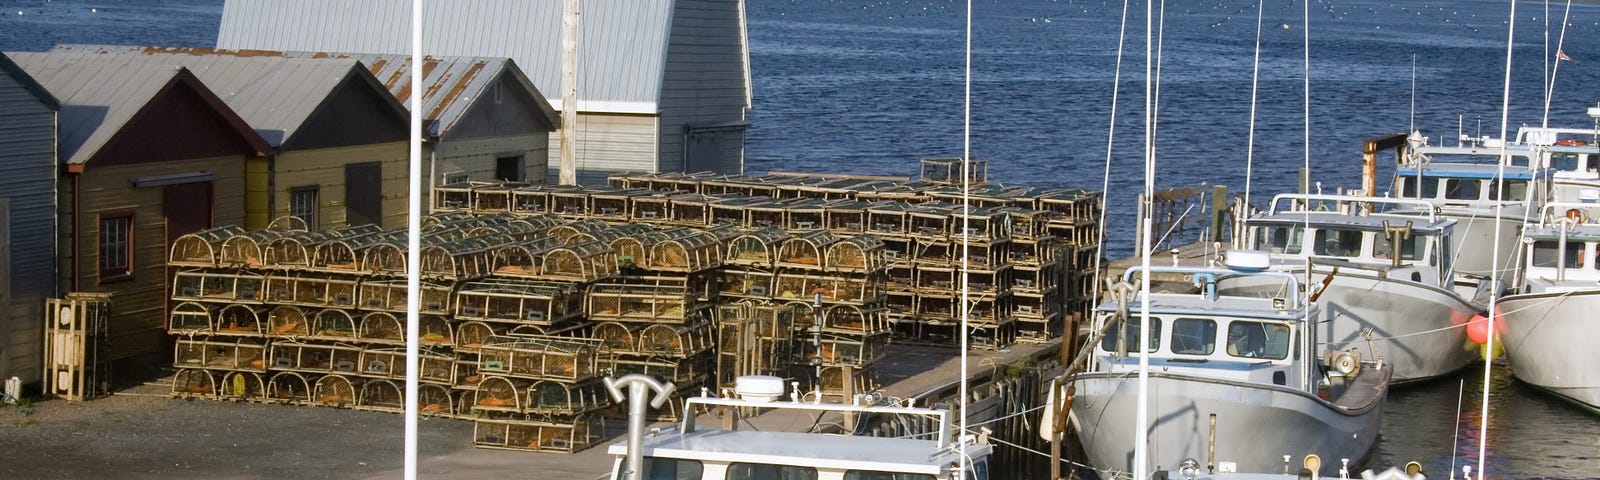 Fishing boats in water along a wharf with lobster traps on the wharf with blue ocean waters in the back and rolling green hills.